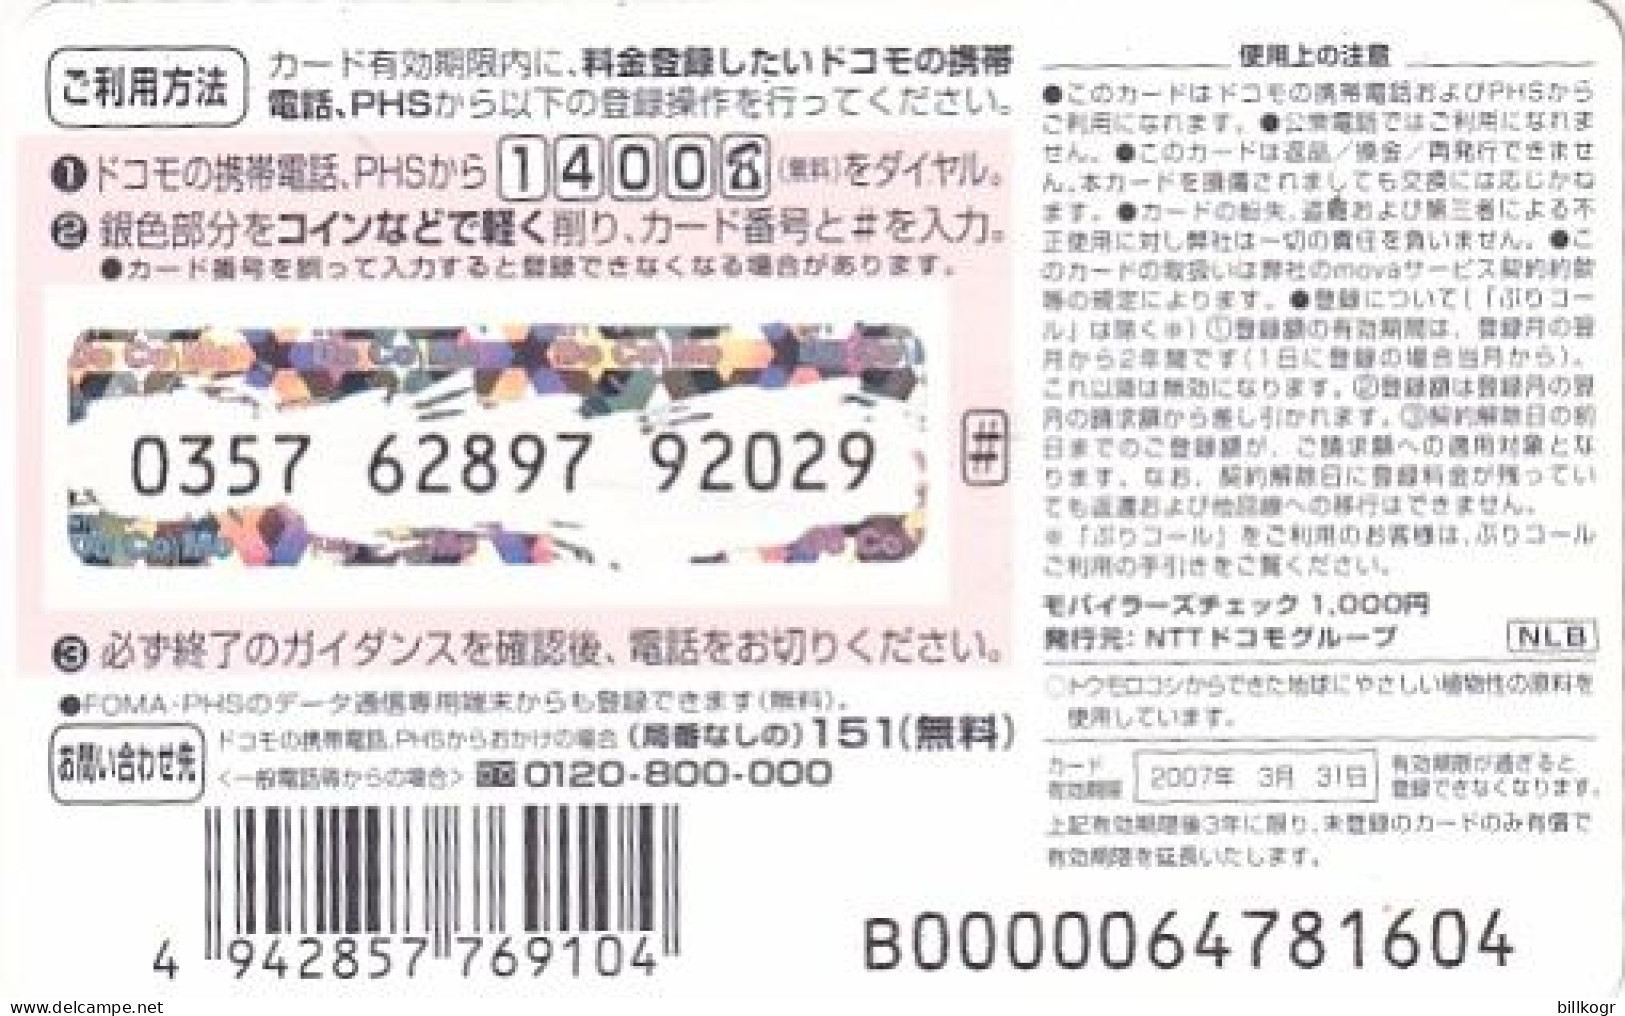 JAPAN - Dogs, Do Co Mo By NTT Prepaid Card Y1000, Exp.date 31/03/07, Used - Dogs